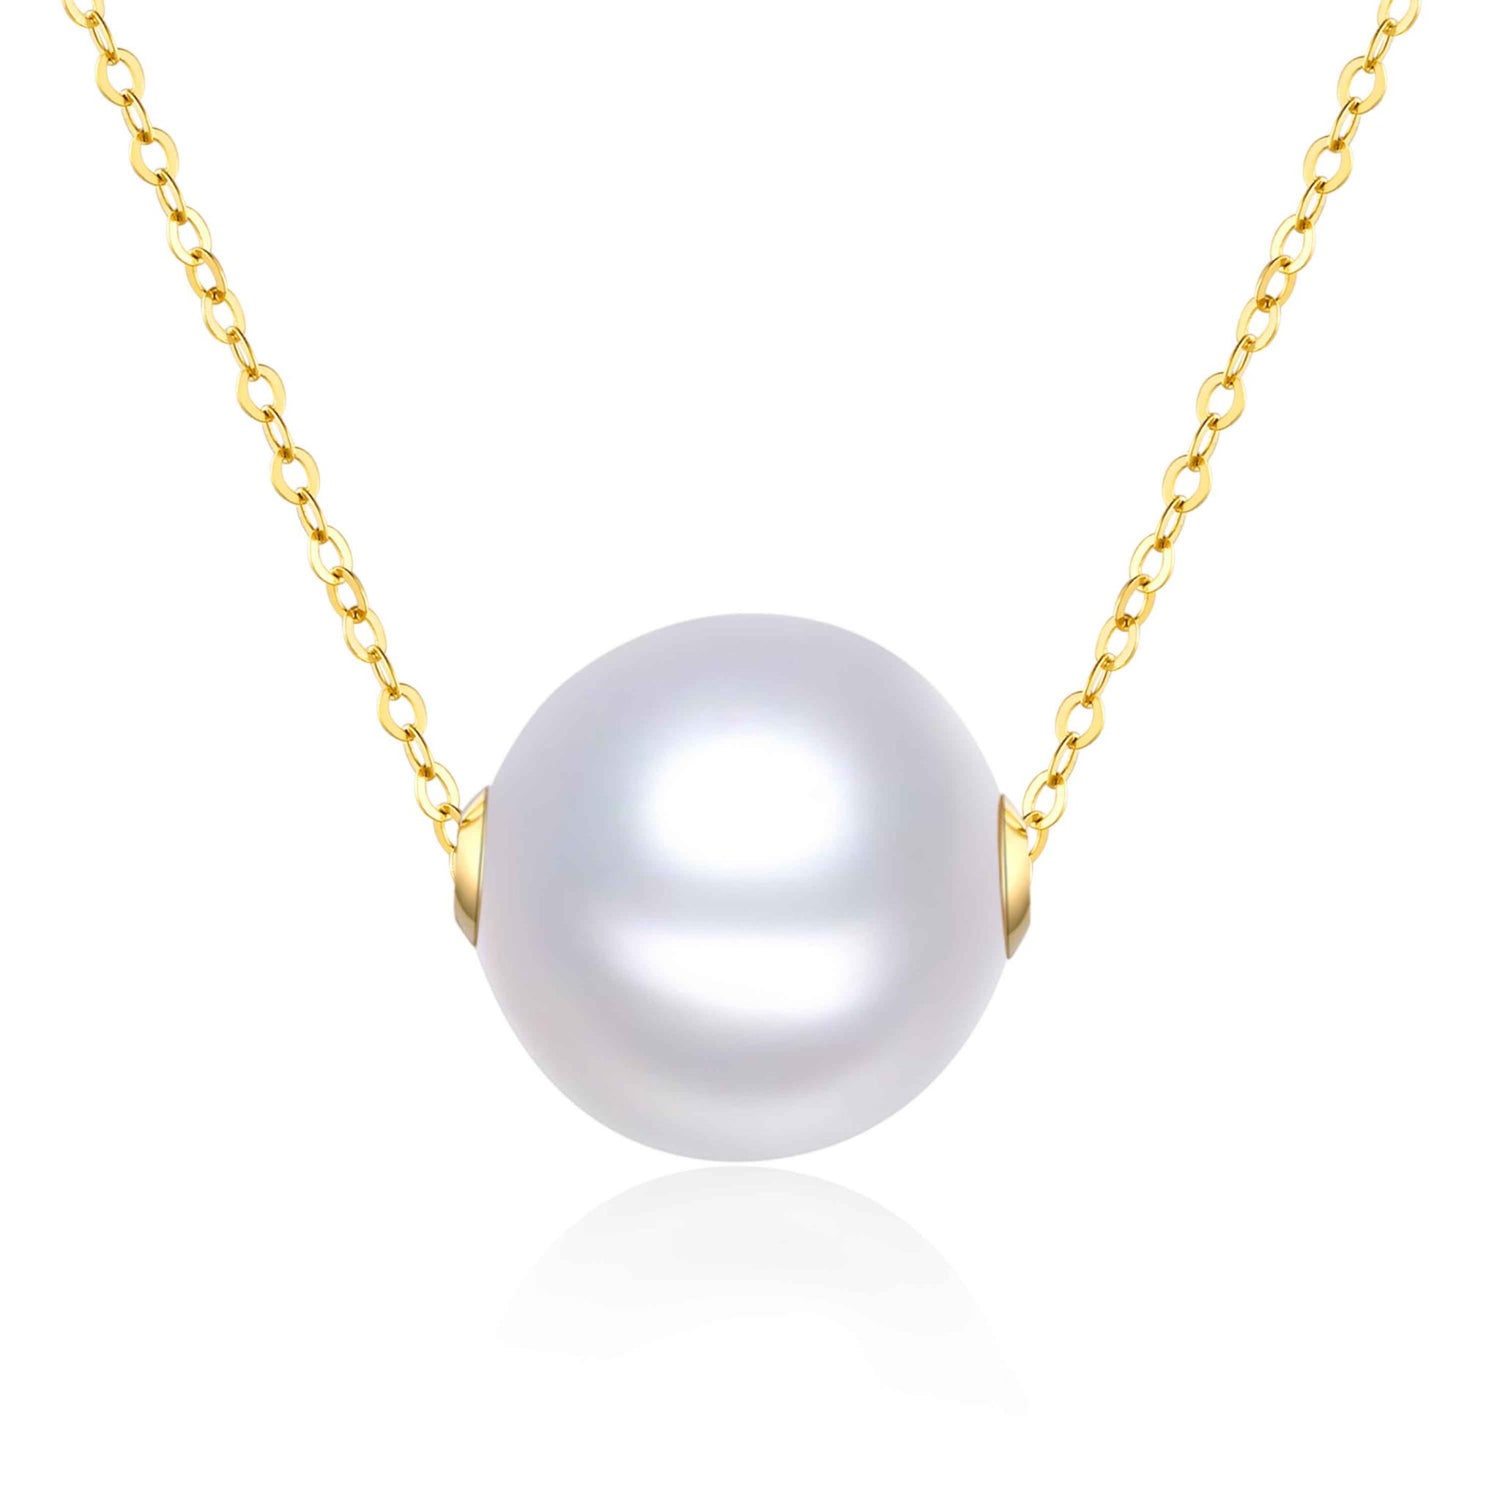 Edison pearl necklace earrings and more | Timeless Pearl